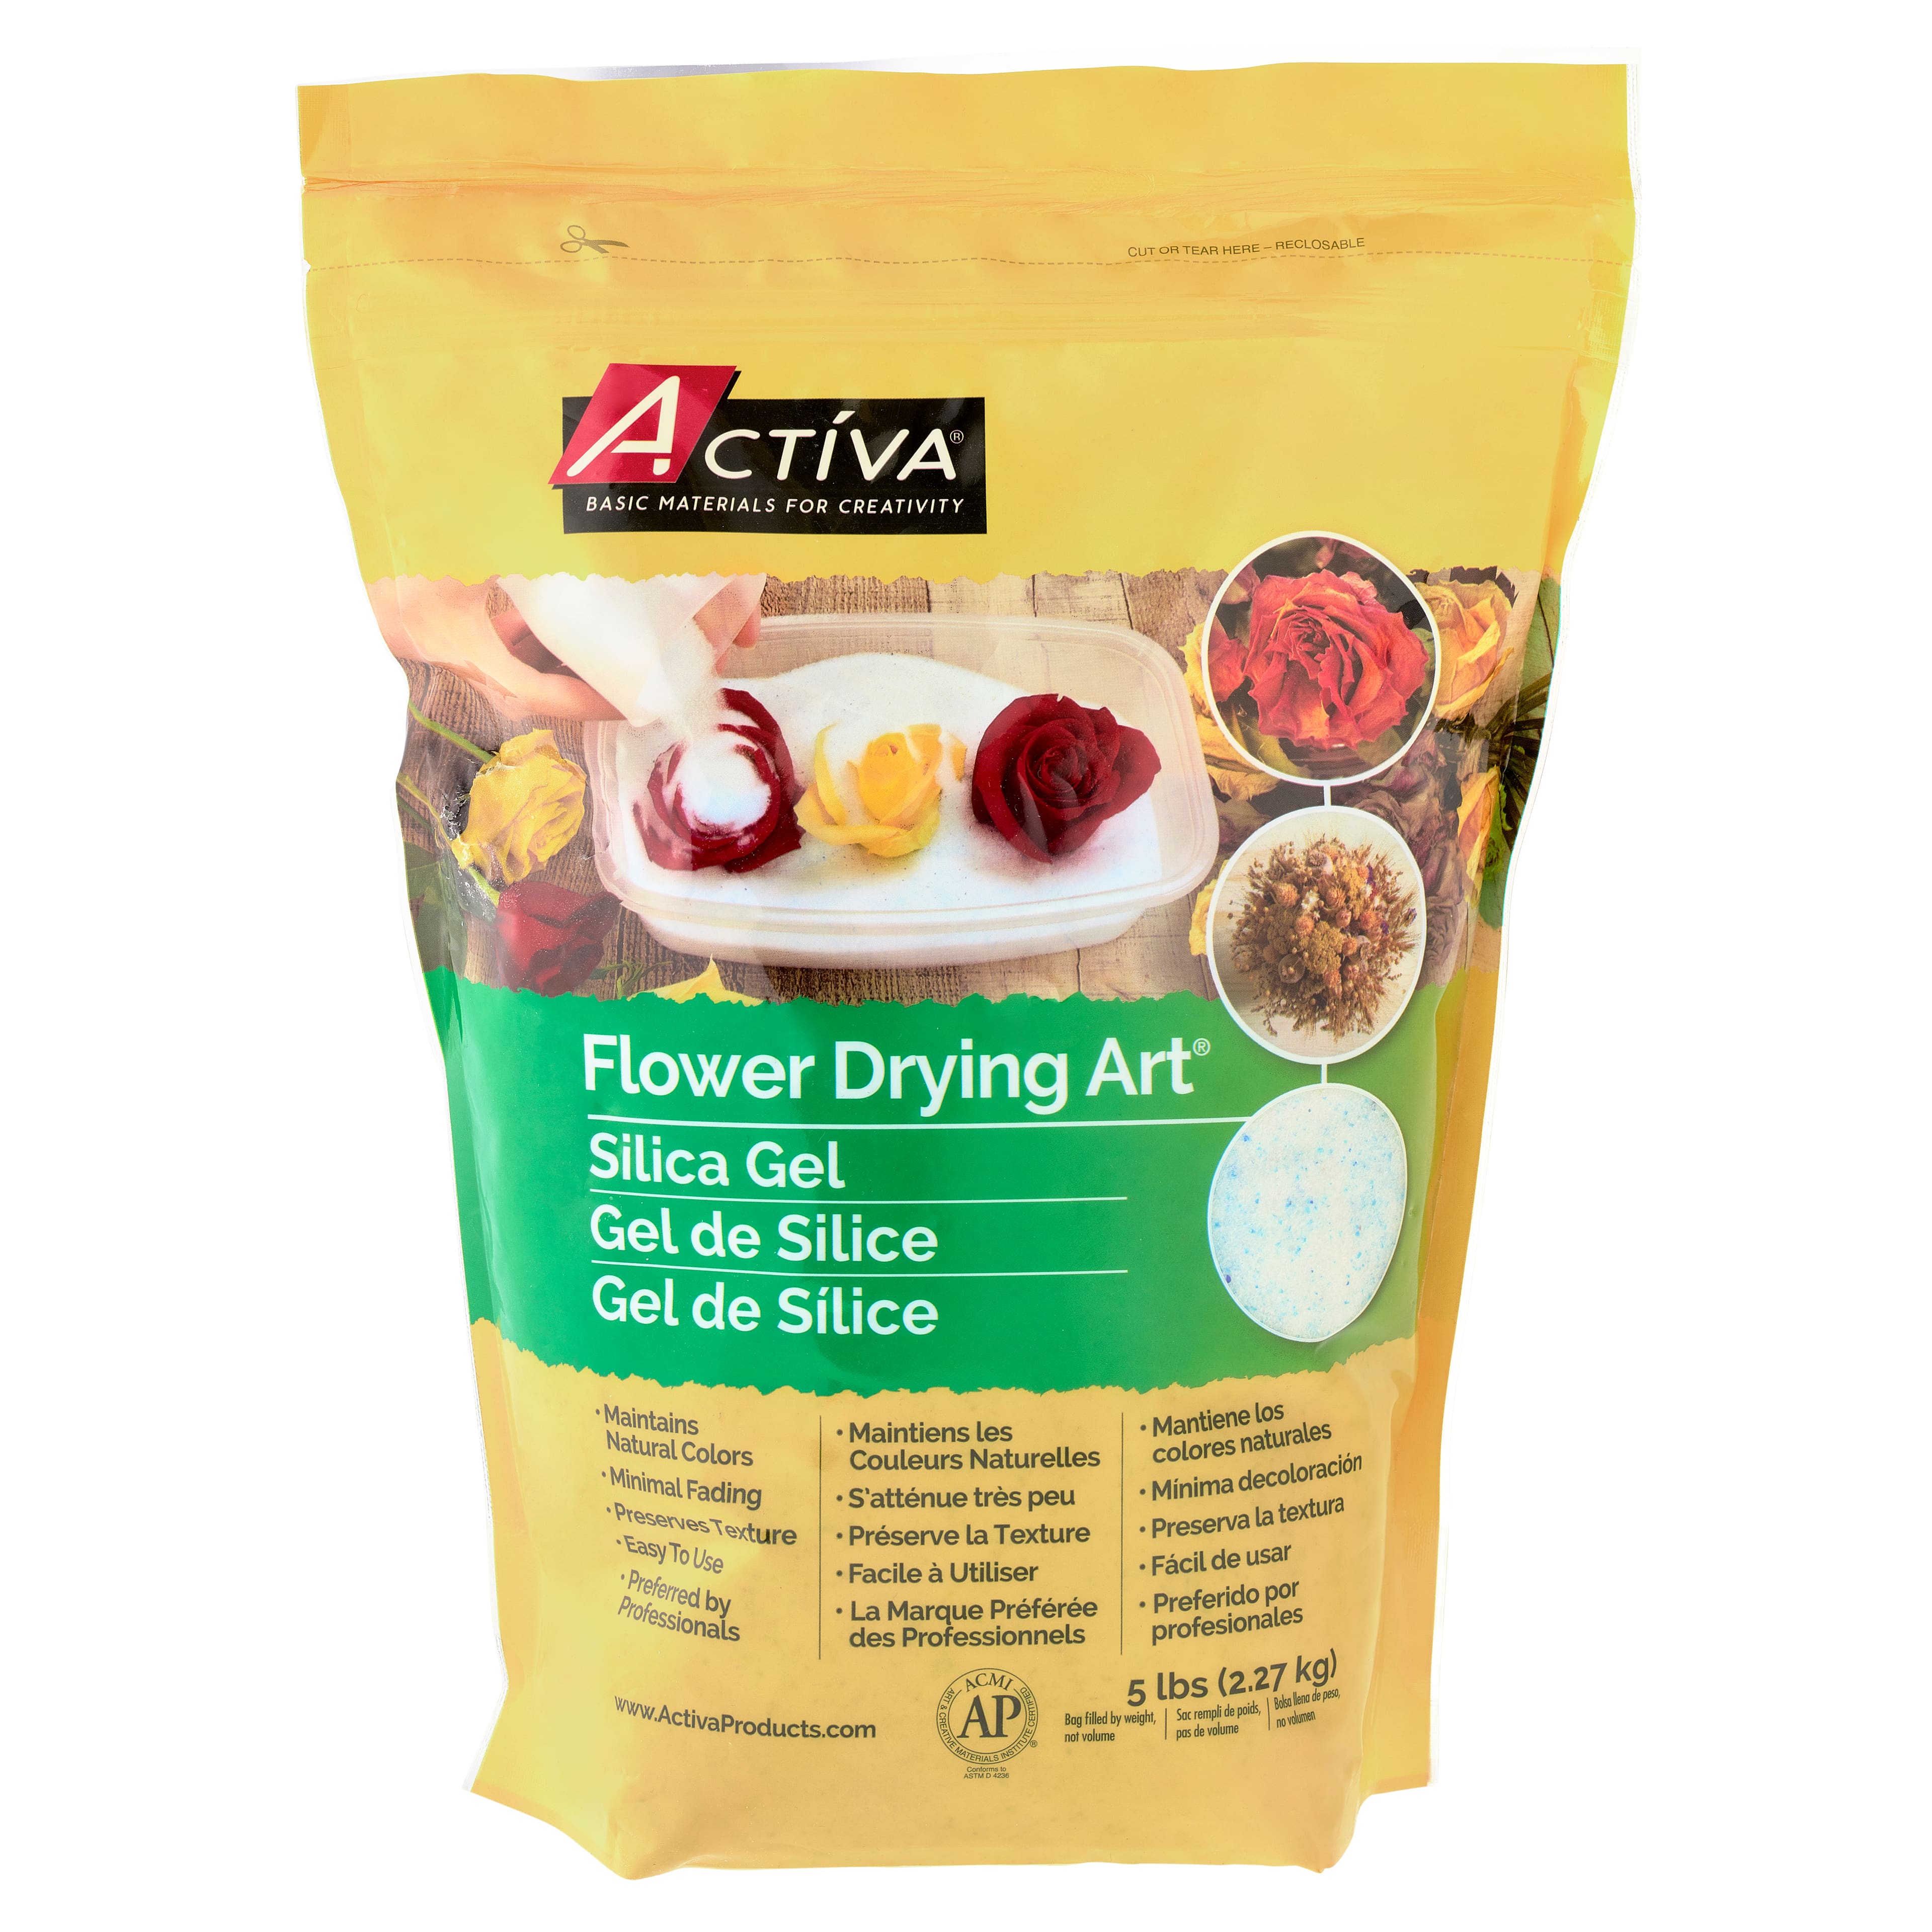 ACTIVA 2610 Silica Gel for Flower Drying, 5 Pound